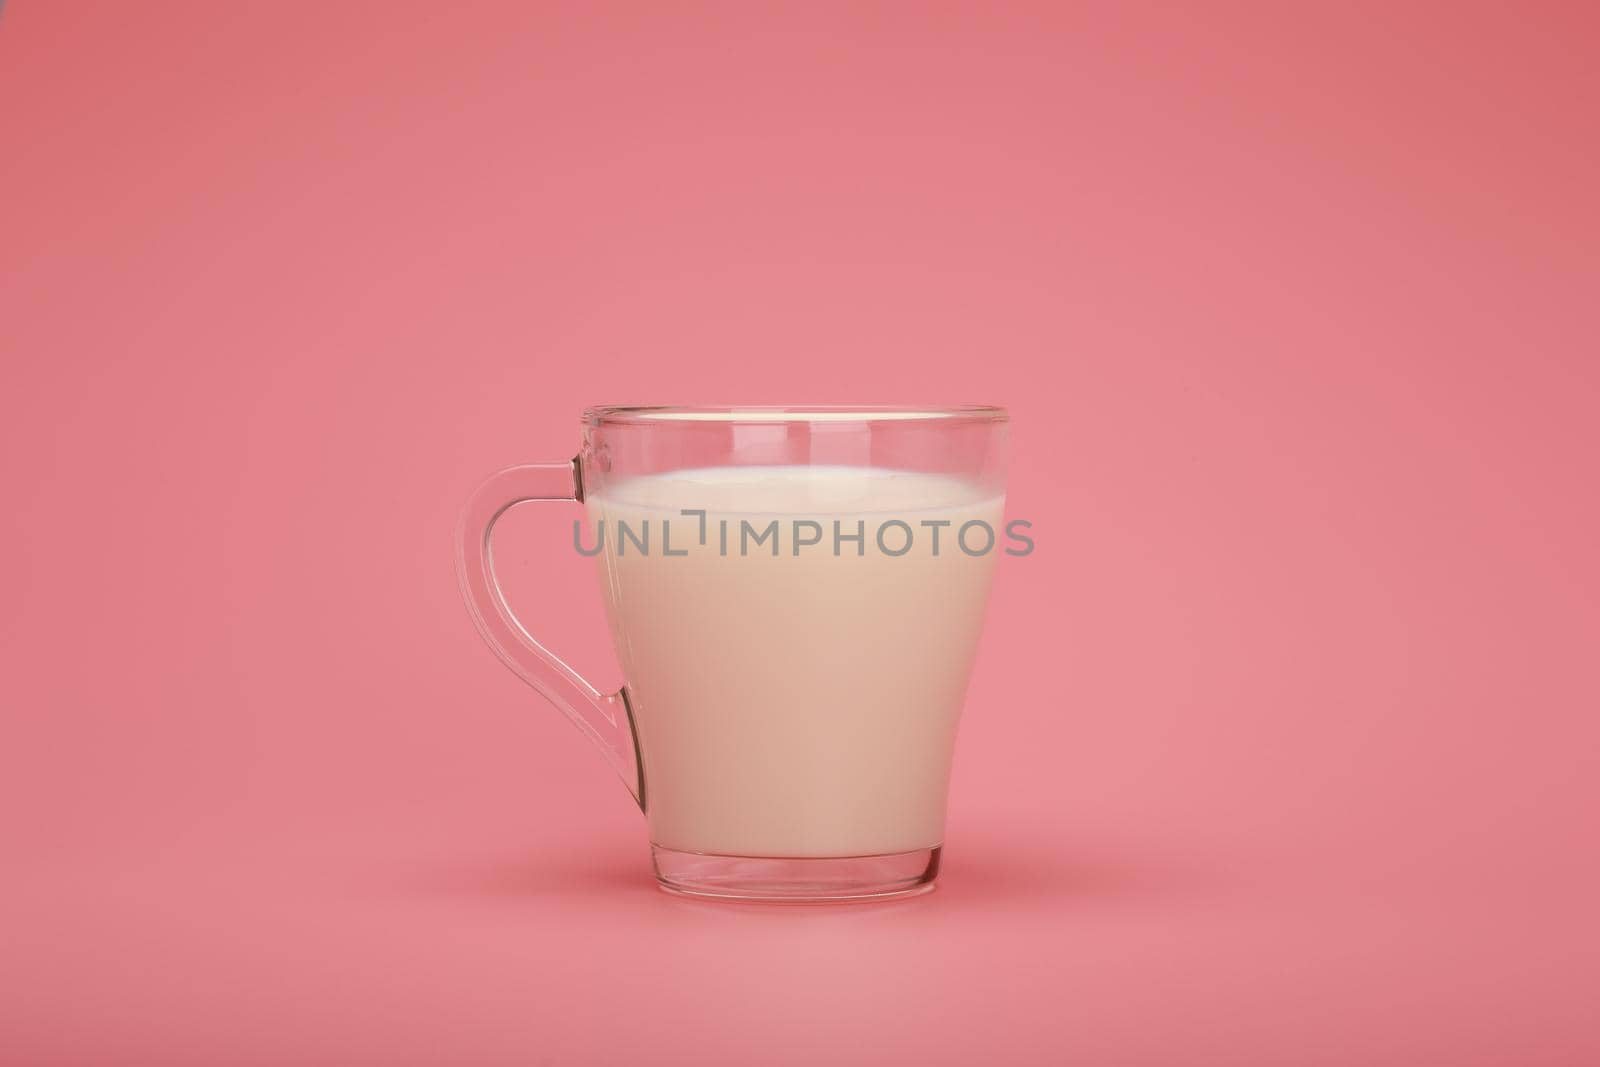 Still life with milk cup against pink background. High quality photo